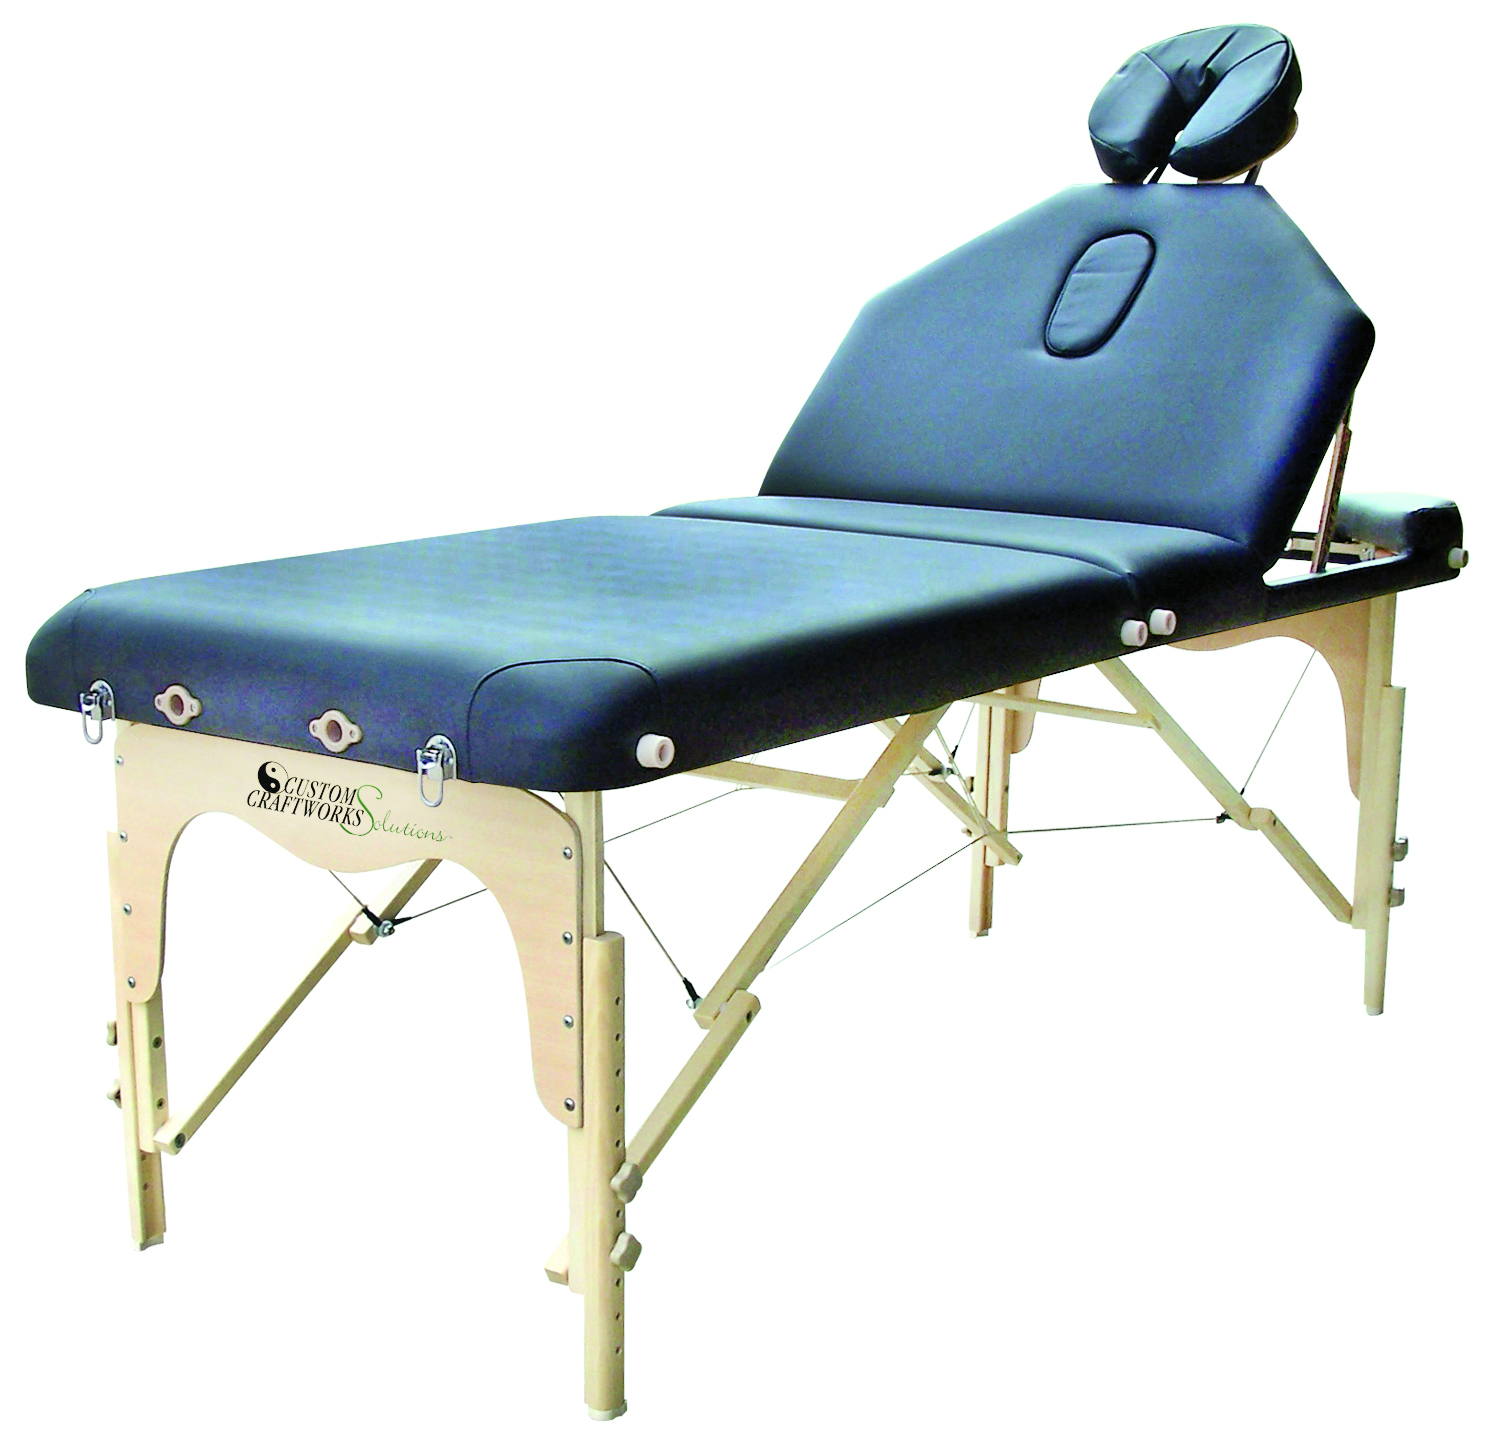 Which Lift Back Massage Table is Right for You?